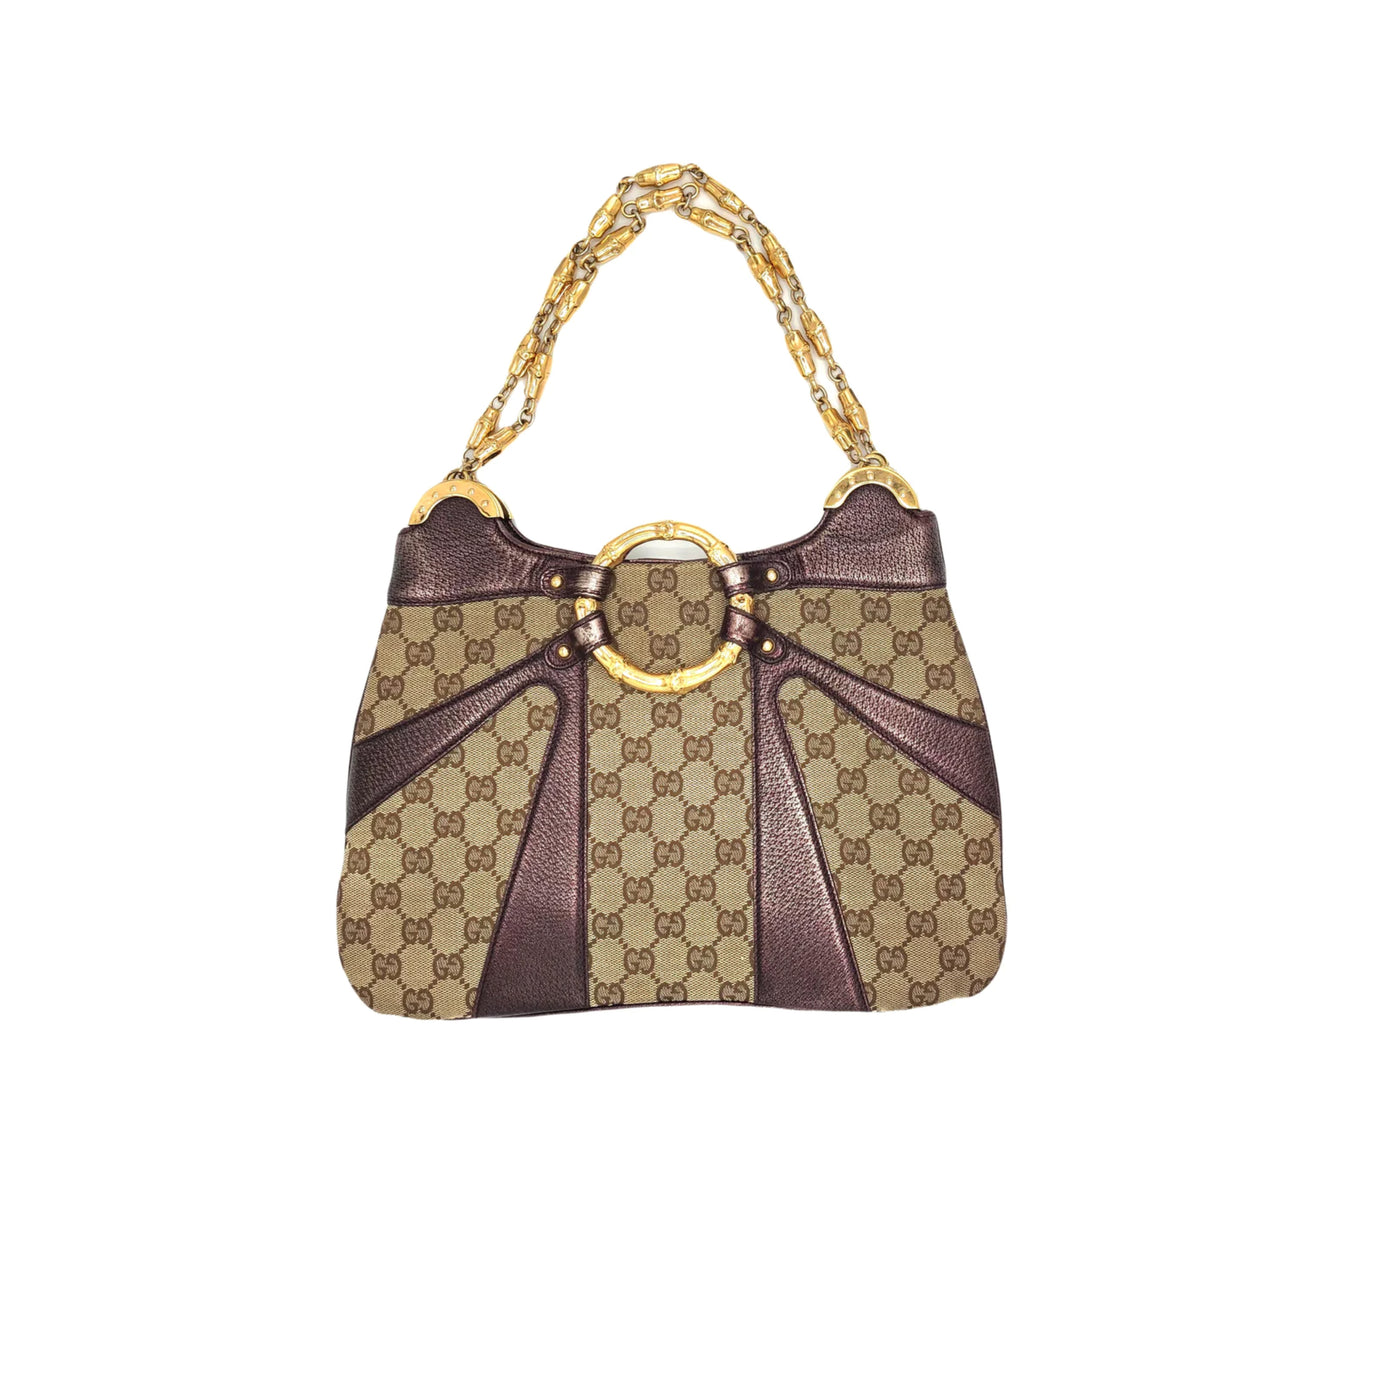 GUCCI by Tom Ford vintage Guccissima Jewelled Bamboo bag